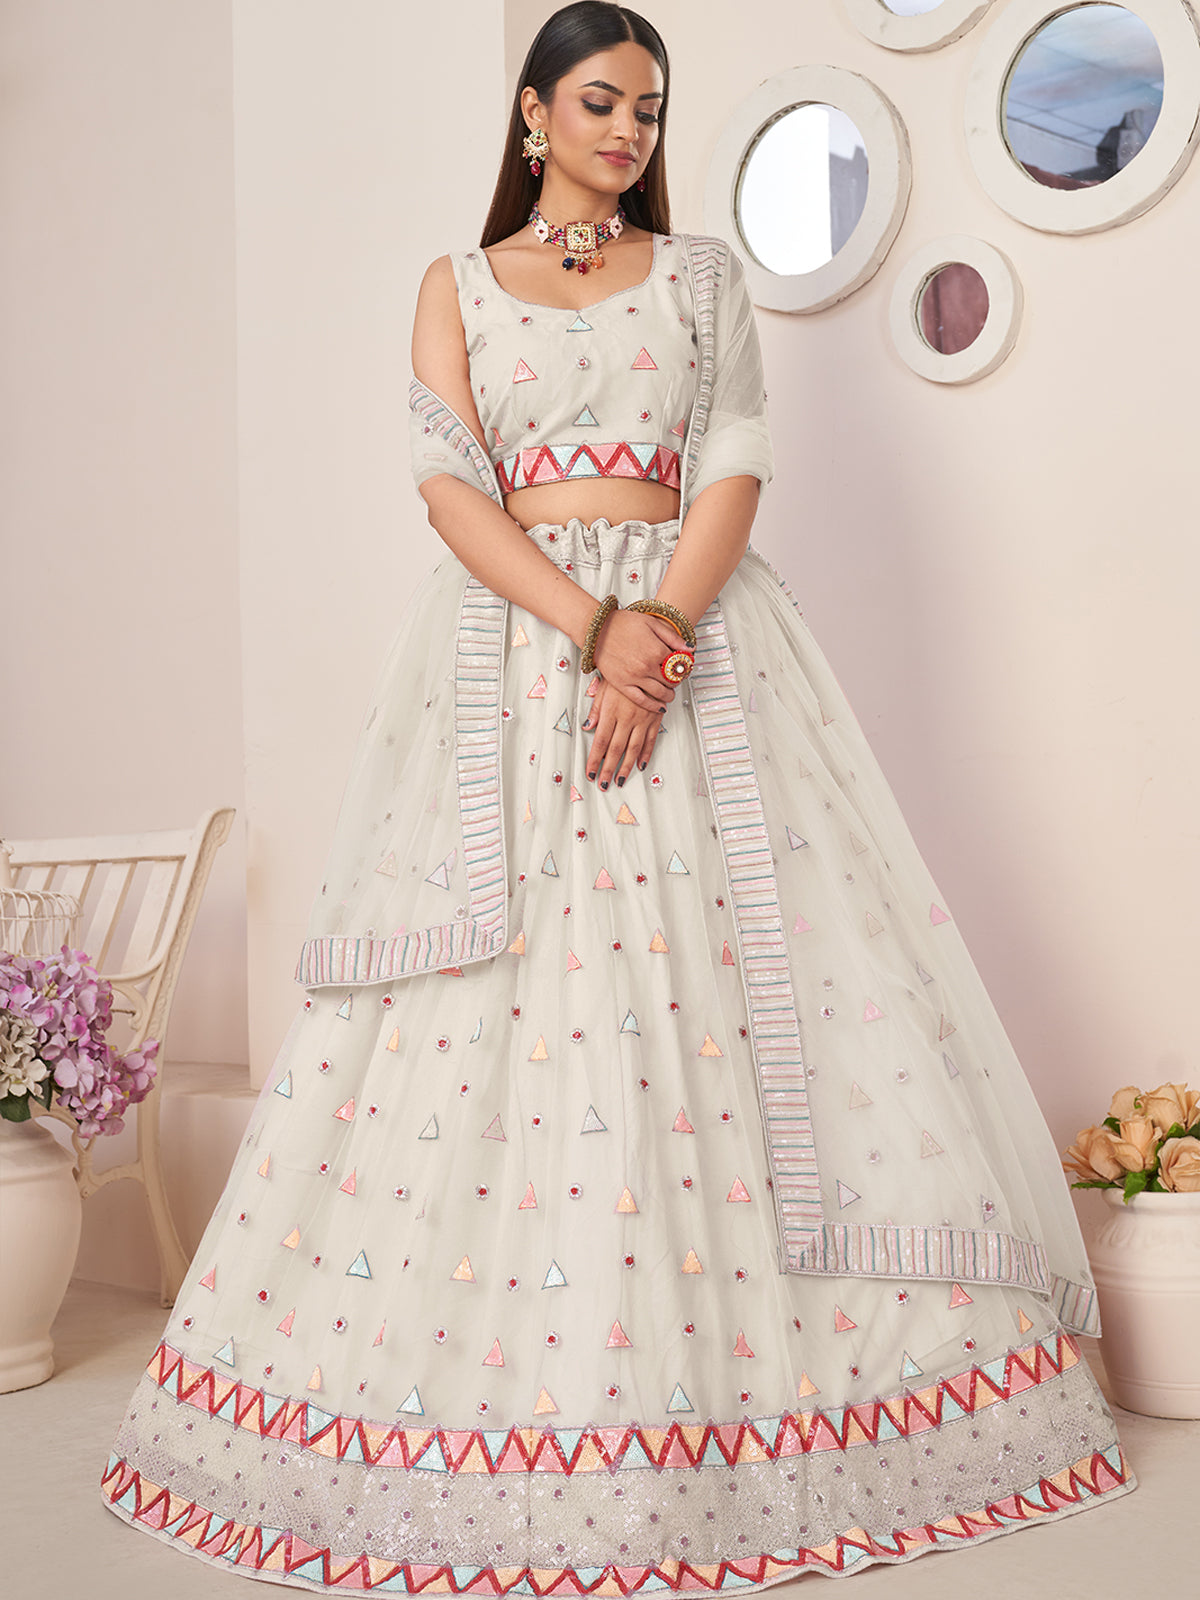 Dress Material | Unstitched lehenga material | Freeup